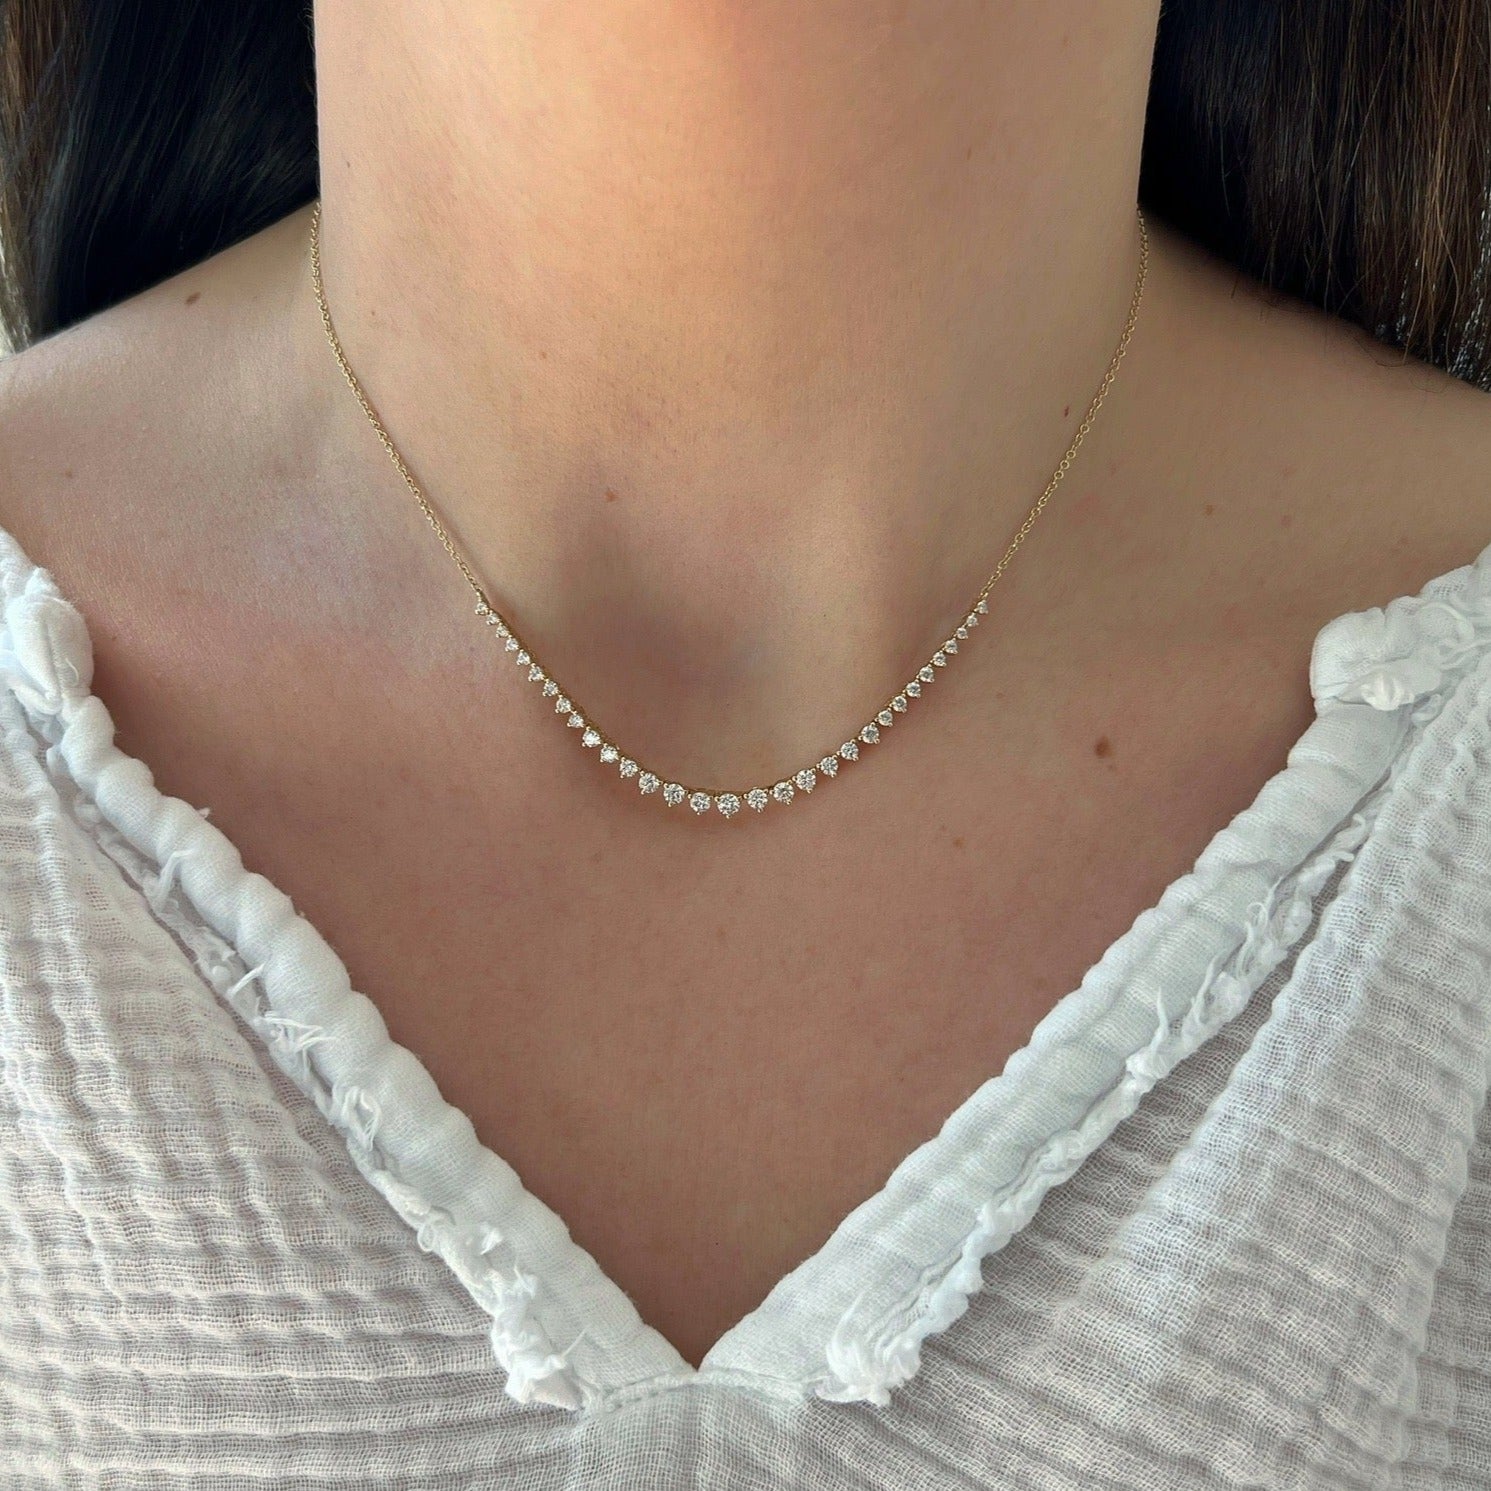 Graduated Diamond Necklace in 14k yellow gold styled on neck of model wearing white blouse